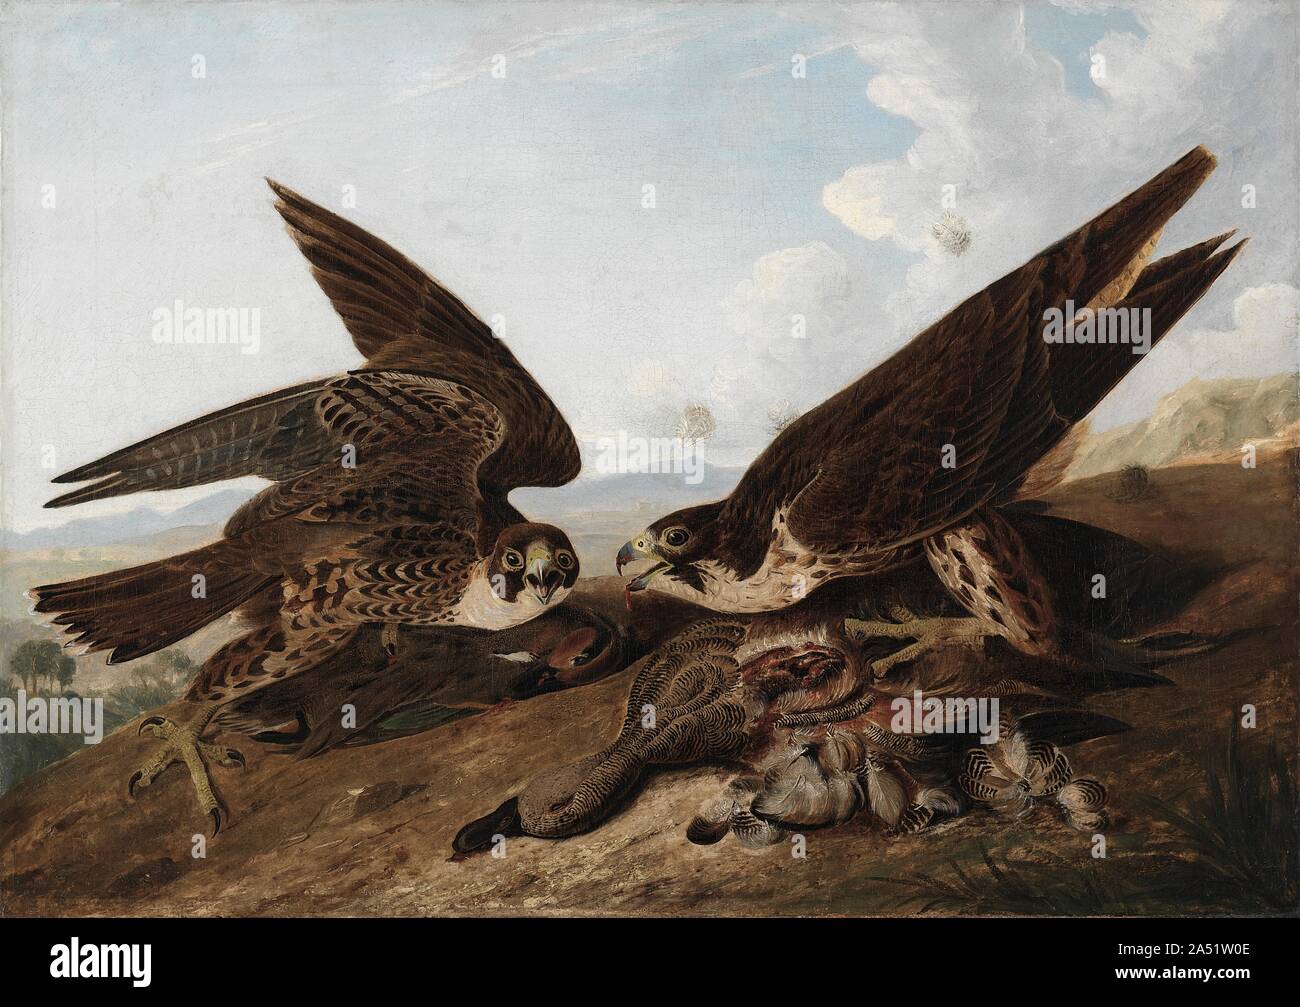 Peregrine Falcons (Duck Hawks), c. 1827. Combining his interests in nature and art, Audubon sought to depict every species of native North American birds posed in action with elements of their habitats. His efforts resulted in the four-volume publication The Birds of America, which contains more than 435 hand-coloured engravings after his watercolour renderings. Occasionally the artist, sometimes with the help of assistants, made oil versions of his watercolours, of which this image of two falcons feasting on fresh duck carcasses is an early and especially lively example. Stock Photo